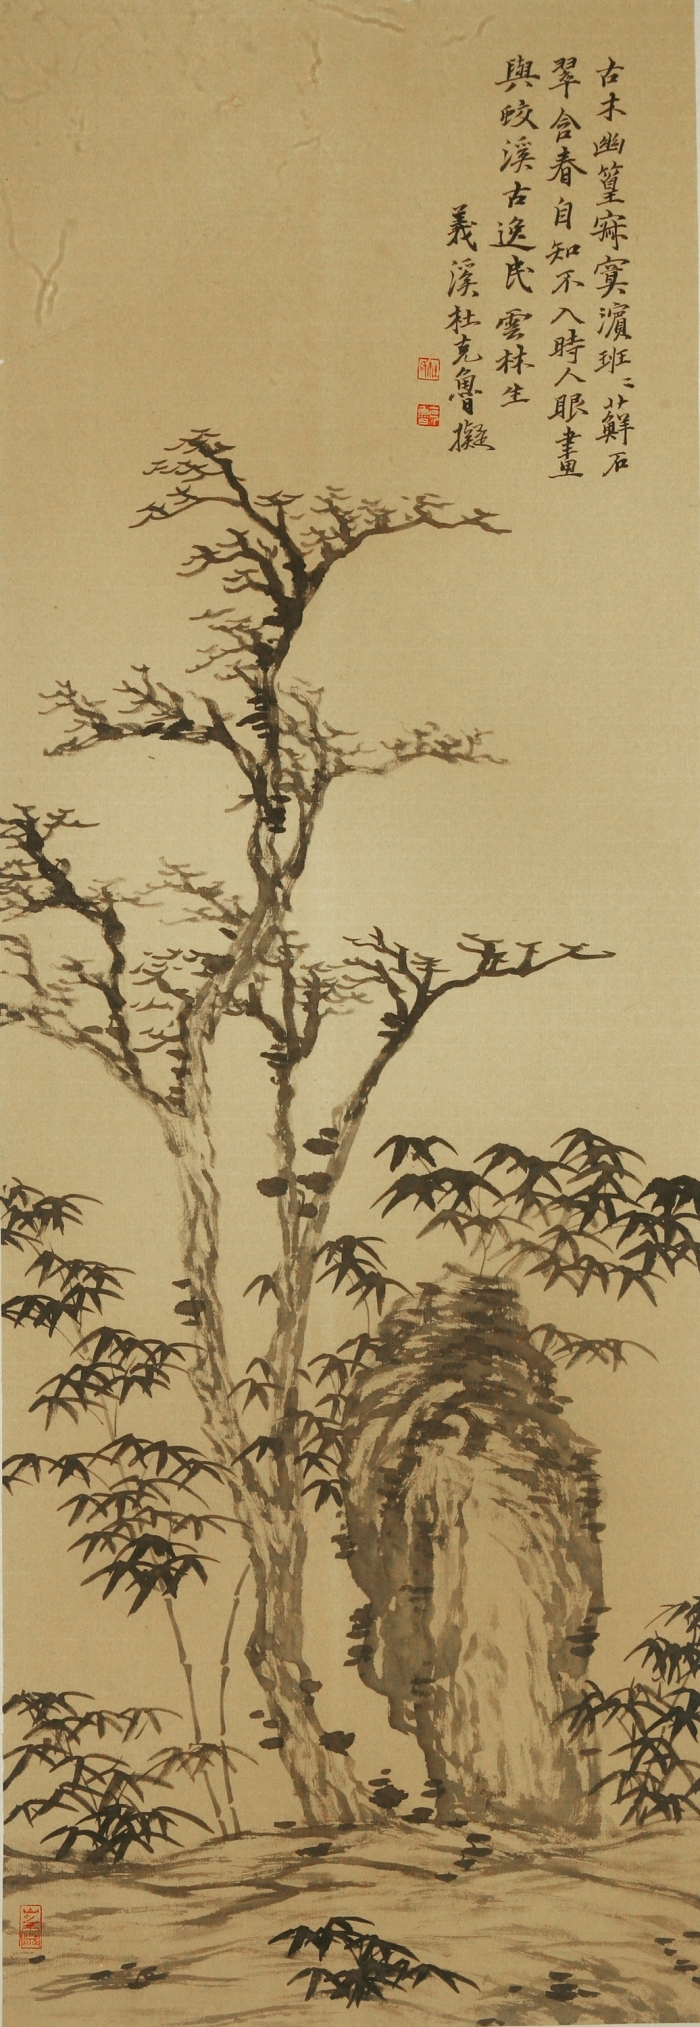 Hefeng Hall Gallery's Contemporary Chinese Painting - Learning form the Past 2